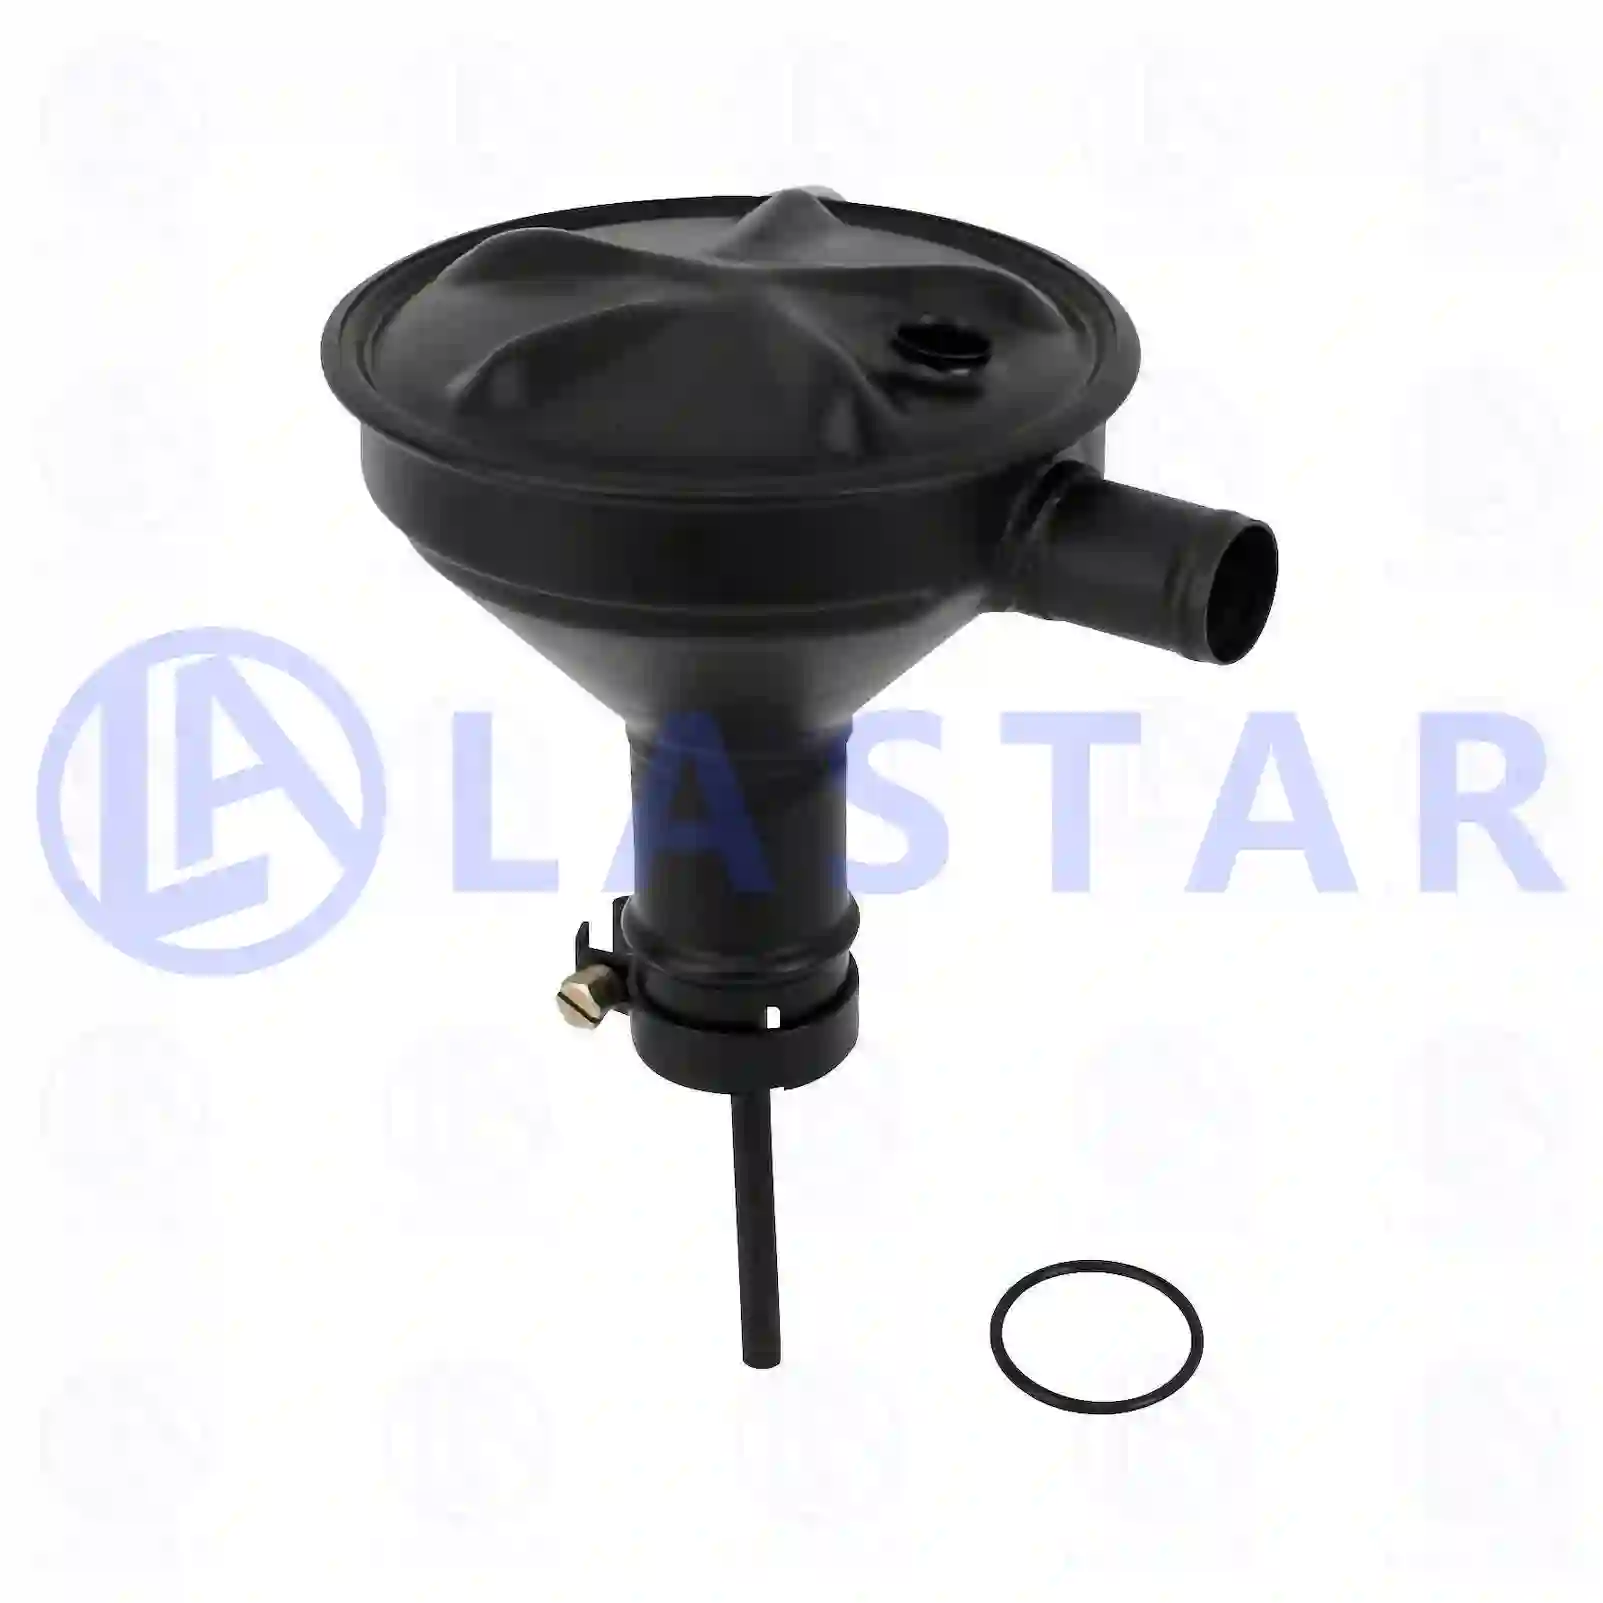  Oil separator, complete with o-ring || Lastar Spare Part | Truck Spare Parts, Auotomotive Spare Parts